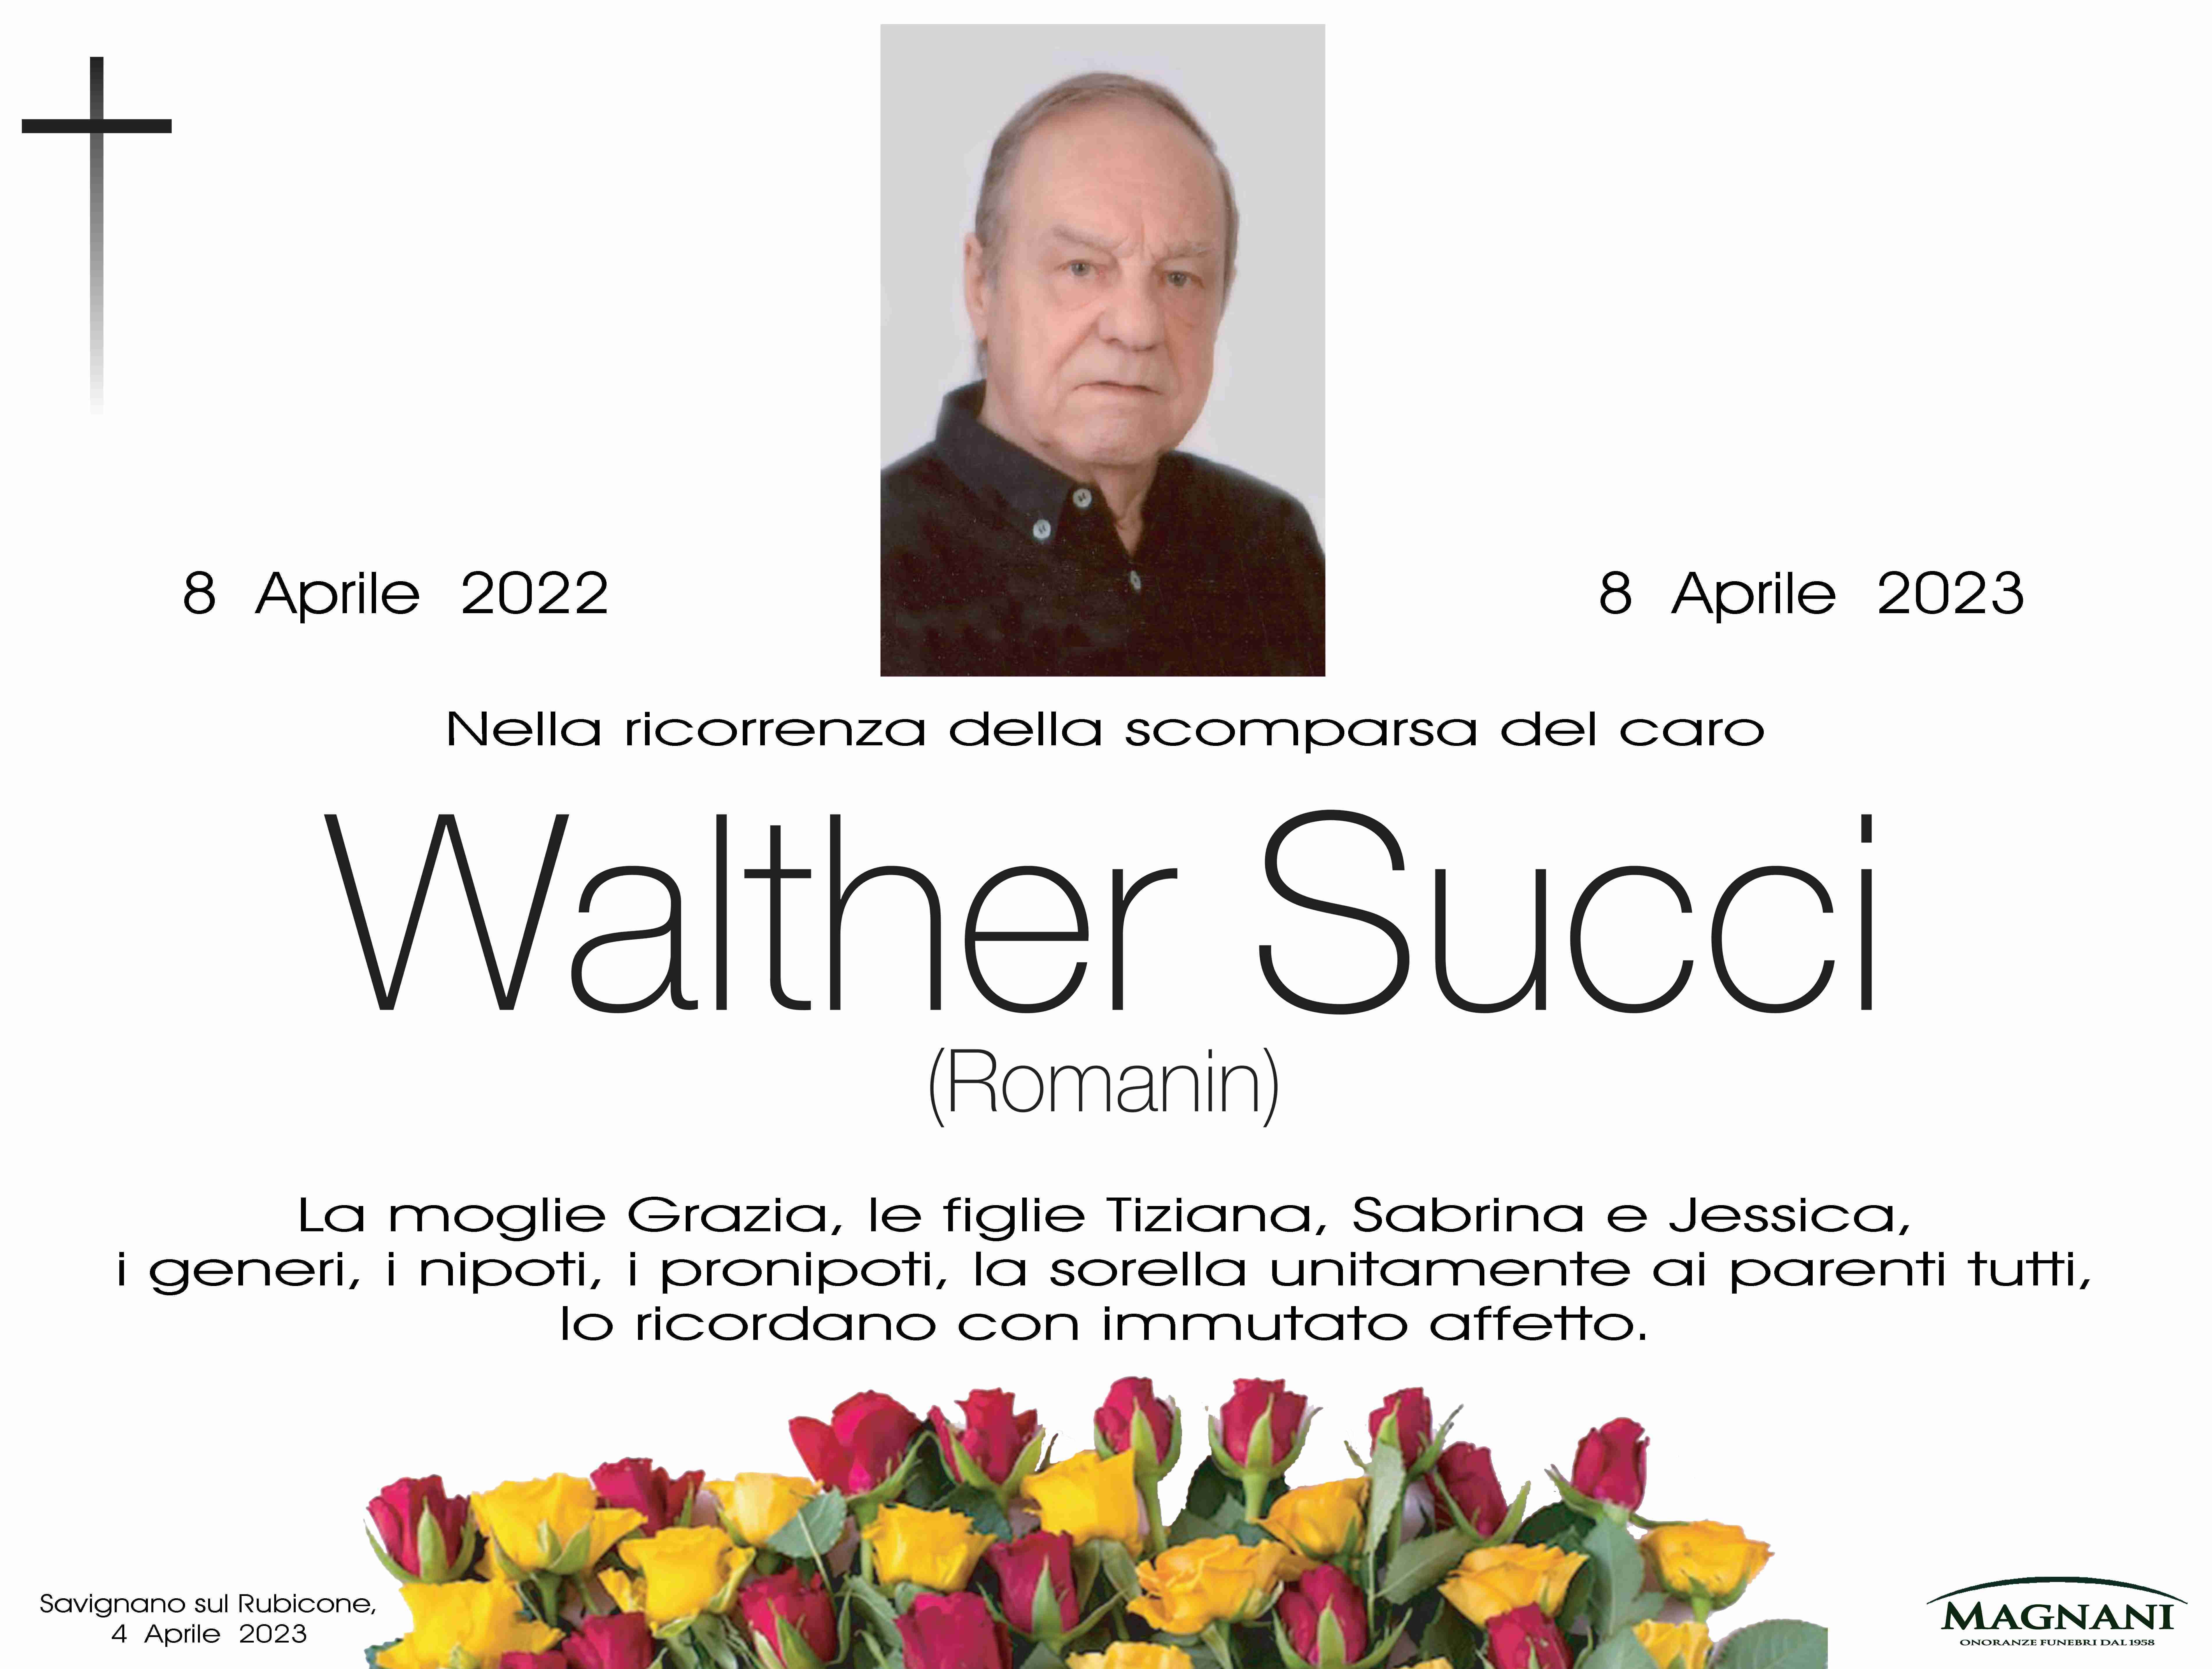 Walther Succi